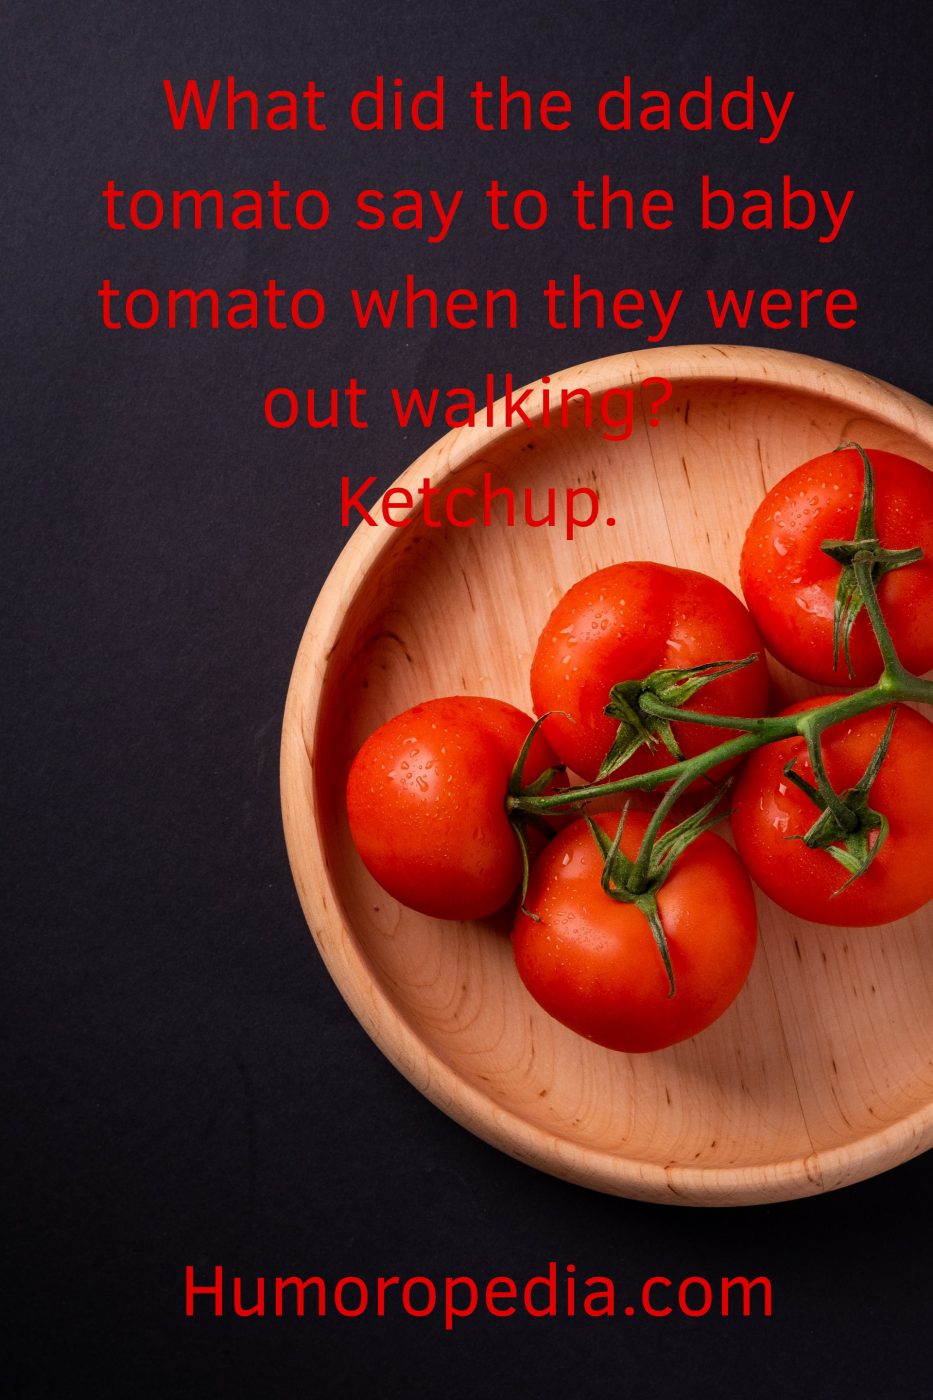 Funny Vegetable Joke About Tomatoes